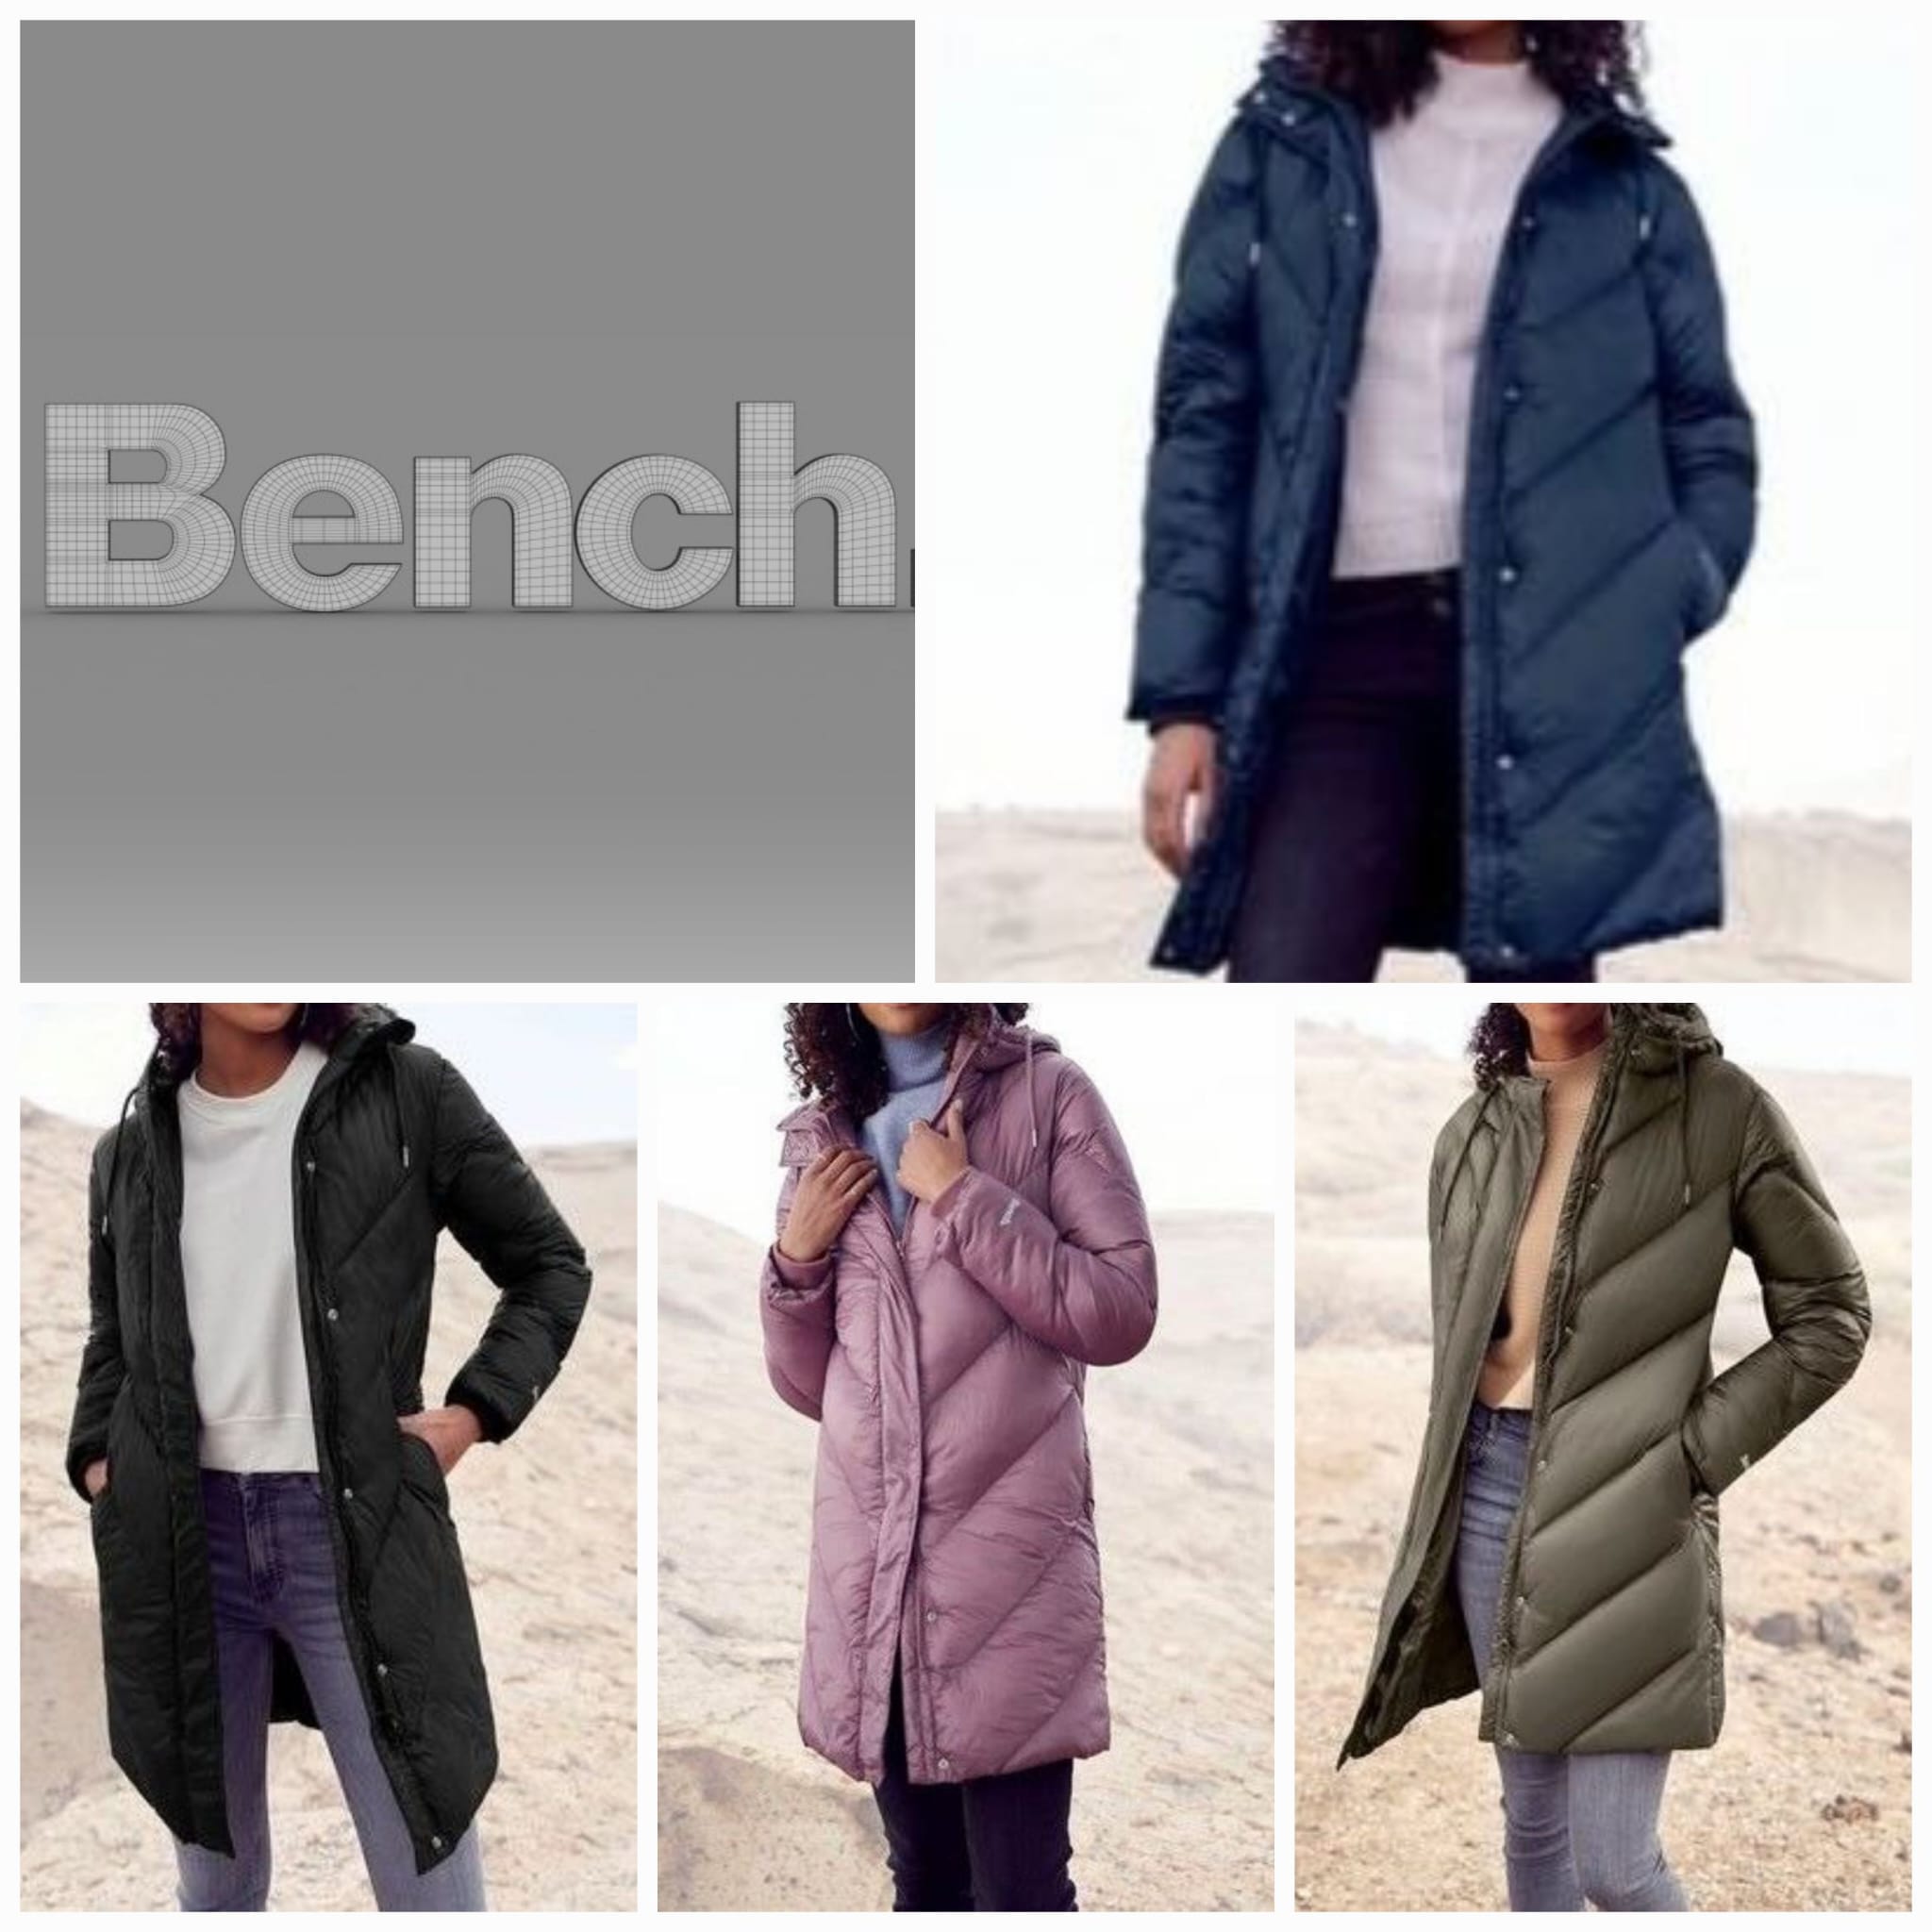 Women's Quilted Coats from Bench